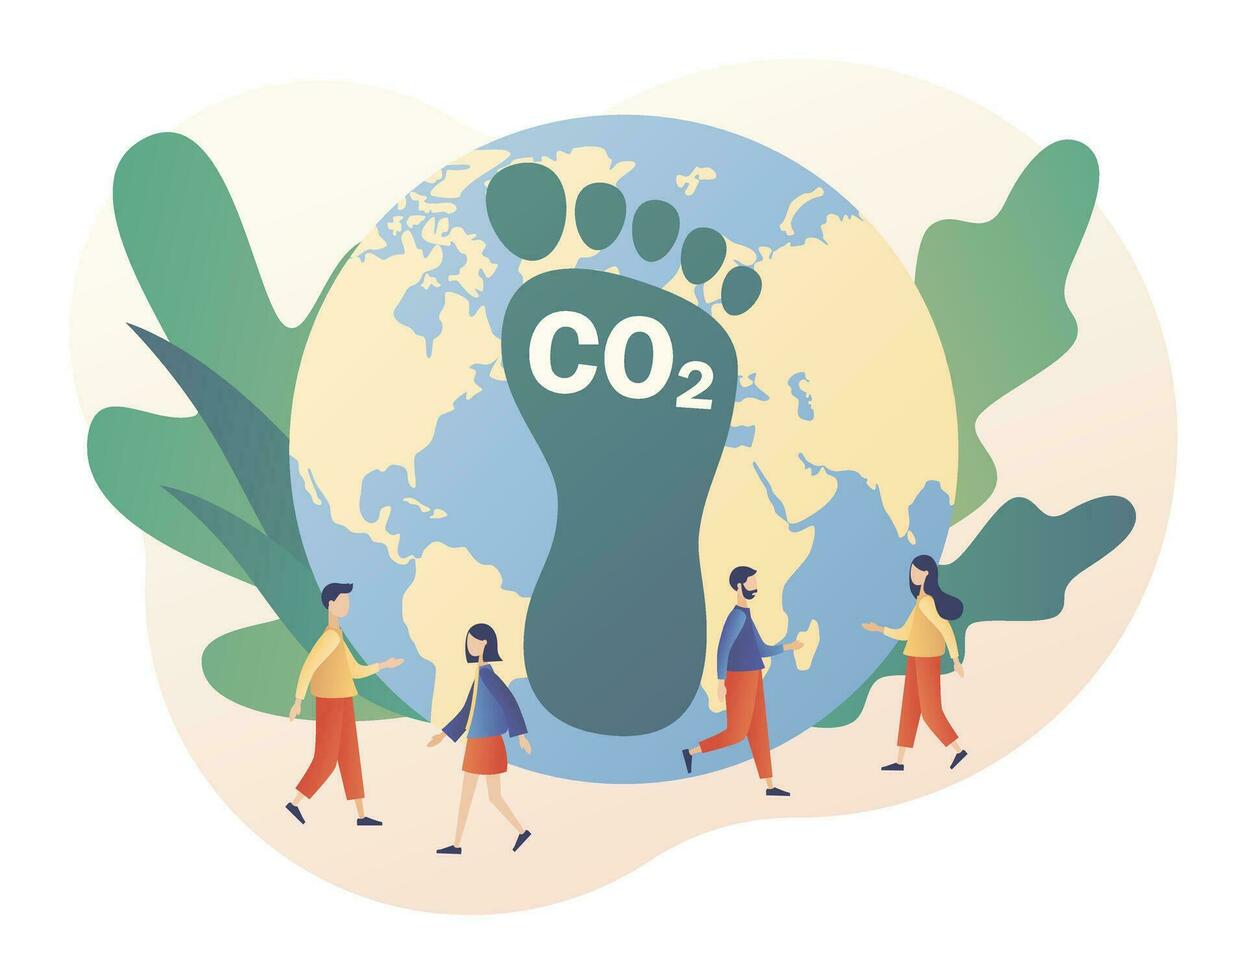 Carbon footprint pollution. Co2 emission environmental impact concept. Dangerous dioxide effect on planet ecosystem. Modern flat cartoon style. Vector illustration on white background